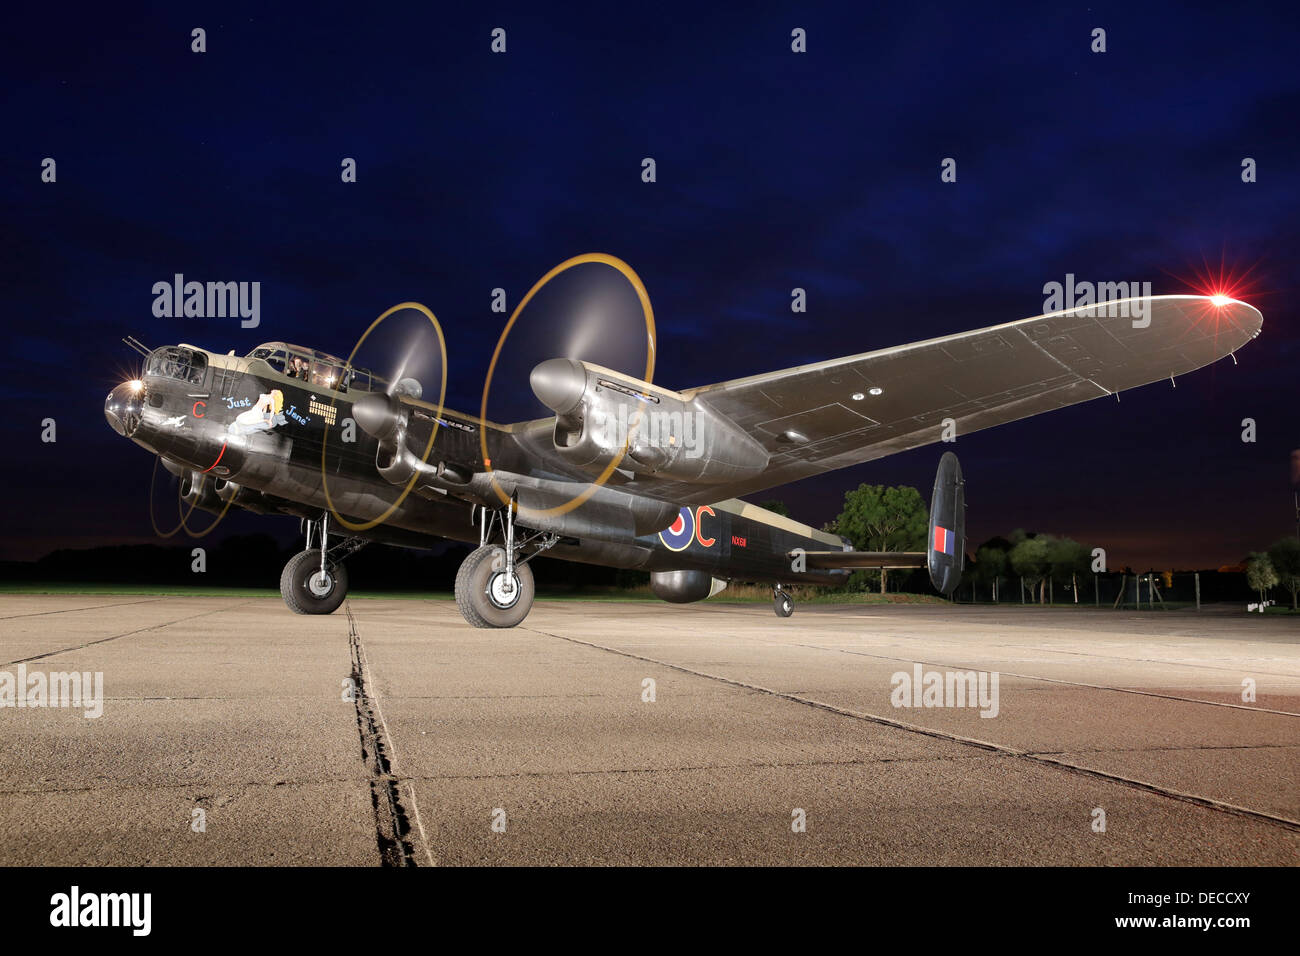 Avro Lancaster classic Wold War 2 bomber Banque D'Images